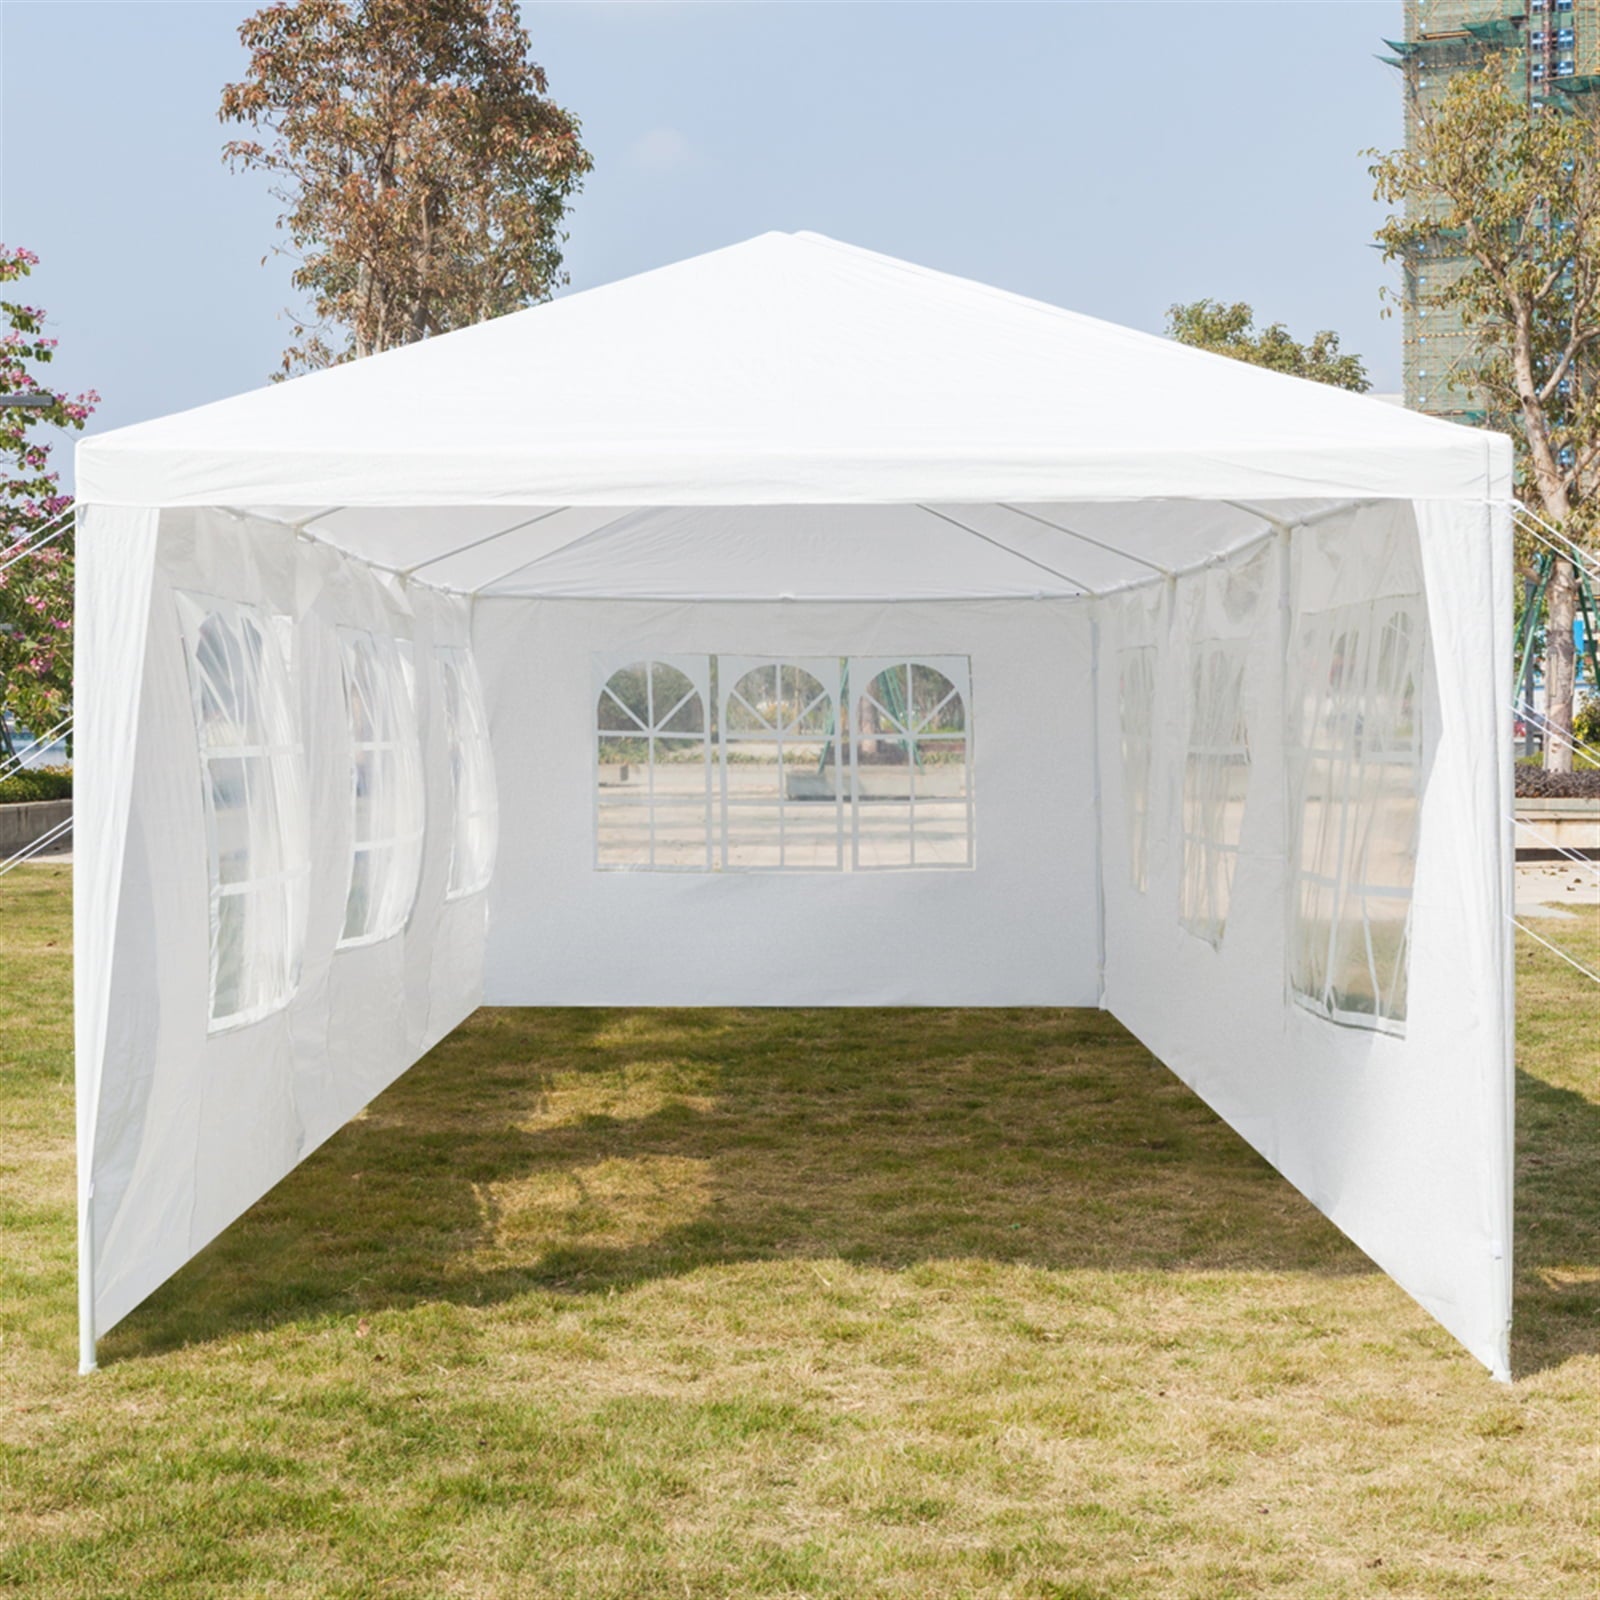 Tenozek 10 x 30 ft White Party Tent Outdoor Gazebo Canopy Tent Wedding Tent with 7 Removable Sidewalls